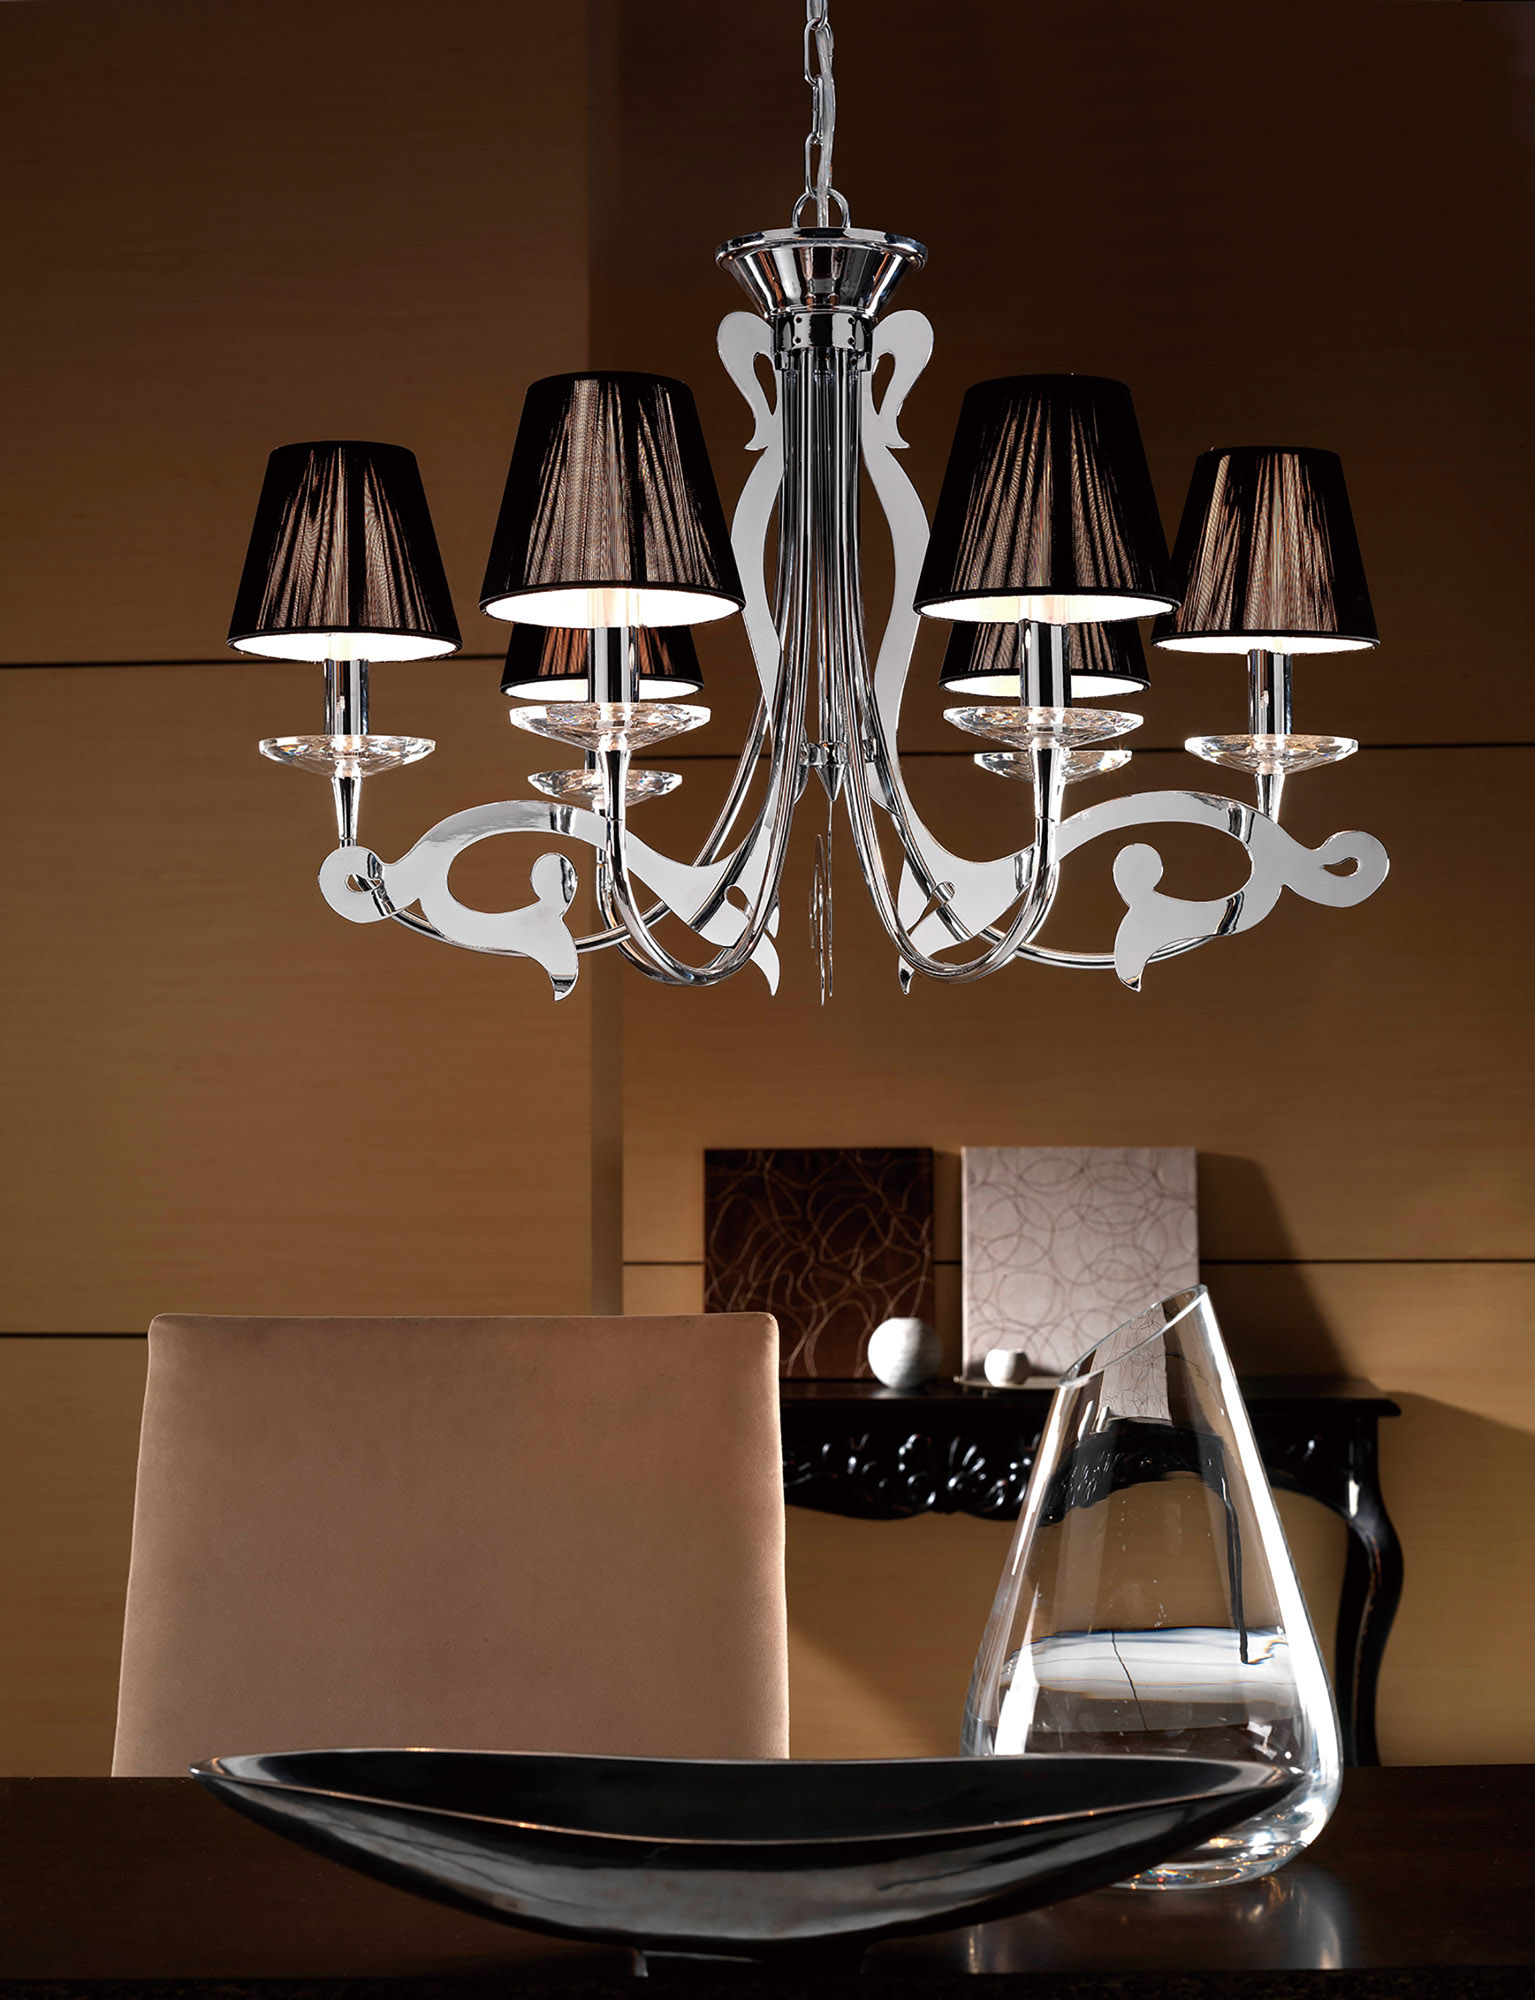 Acanto Ceiling Lights Mantra Multi Arm Fittings